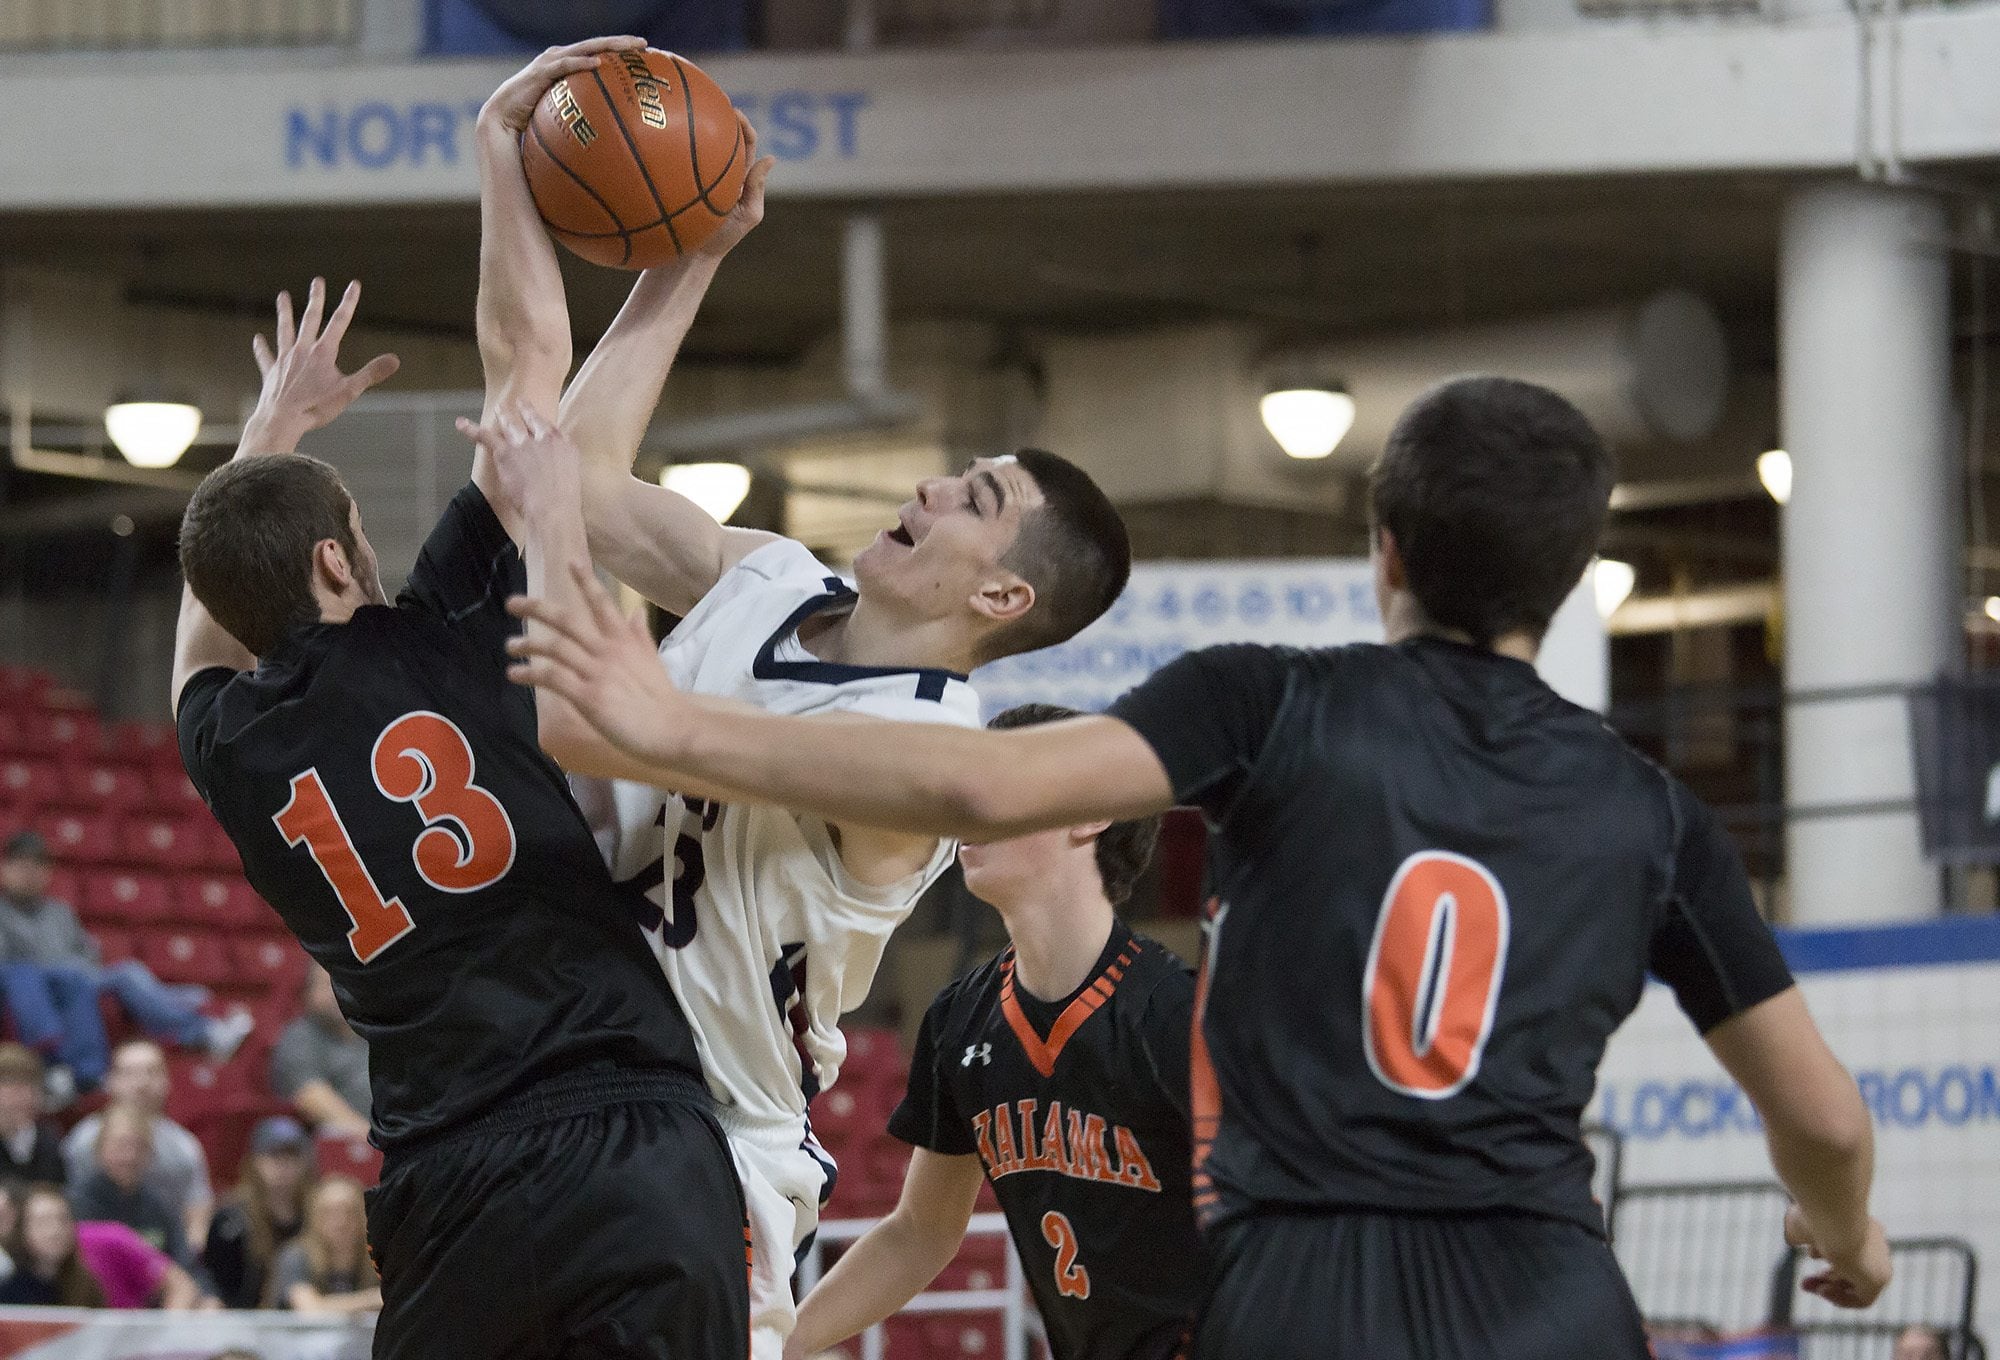 King’s Way Christian High School’s Kienan Walter, center, has his shot blocked by Kalama High School’s Austin Dines in the first half of their game in the boys’ class 1A state basketball tournament March 5, 2016 in the Yakima SunDome in Yakima, Wash.